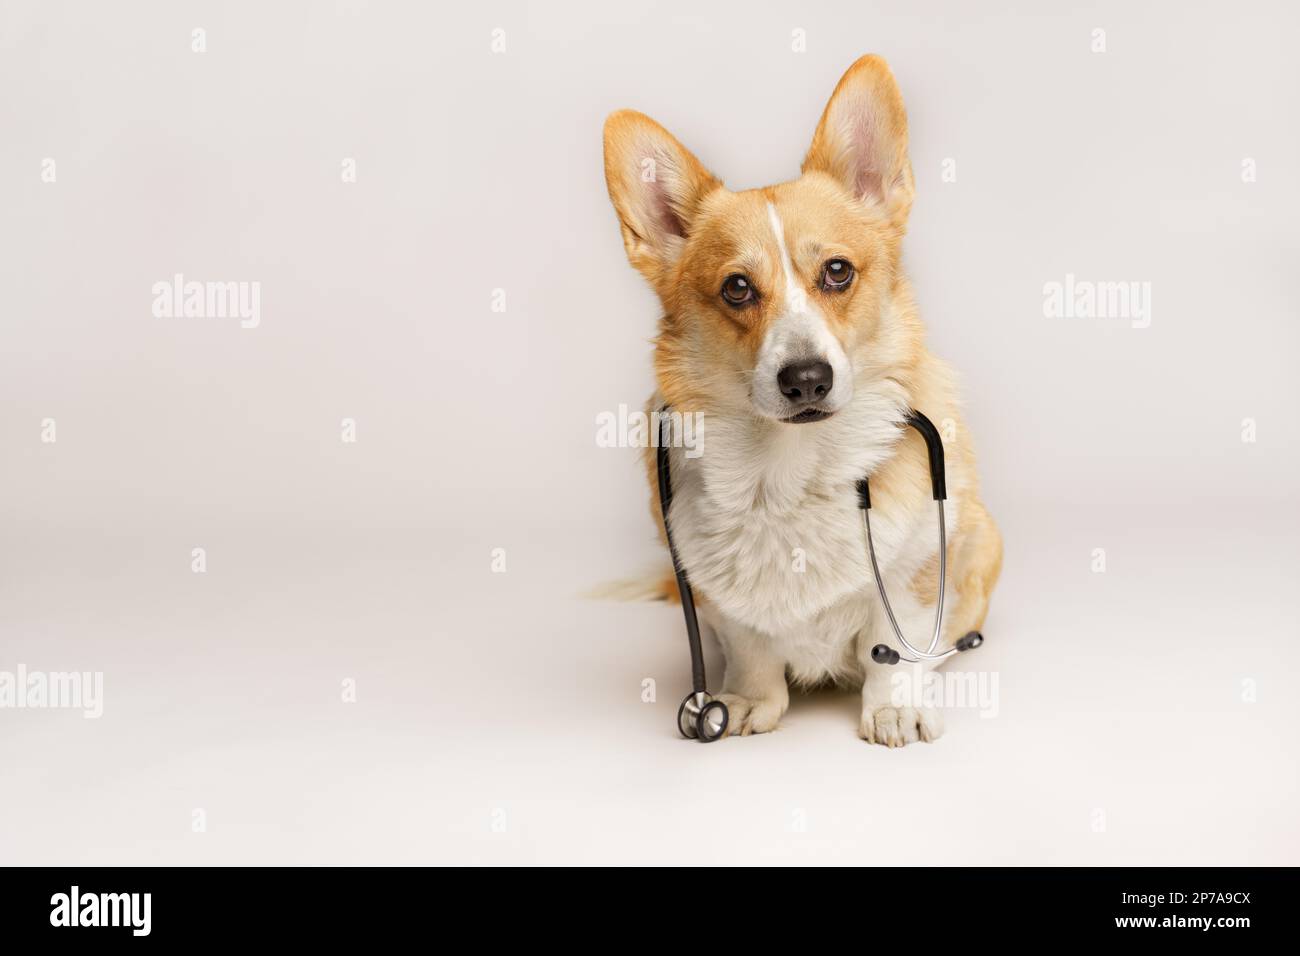 A cute pembroke Welsh Corgi dog sits with a stethoscope around his neck. Studio Stock Photo